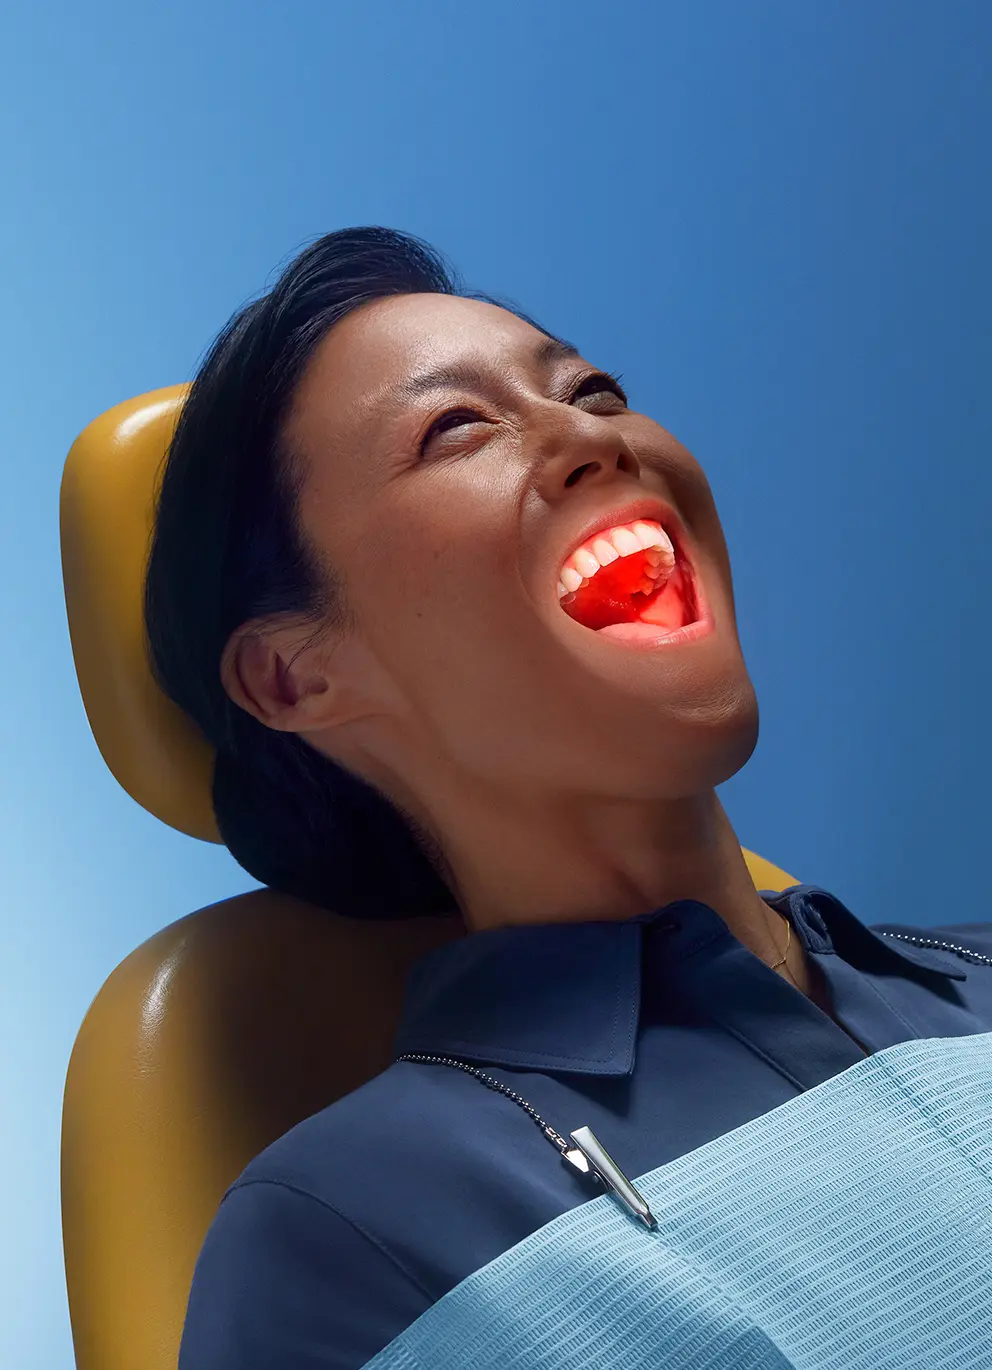 MRW my dentist tells me she used a topical anesthetic and I'm too